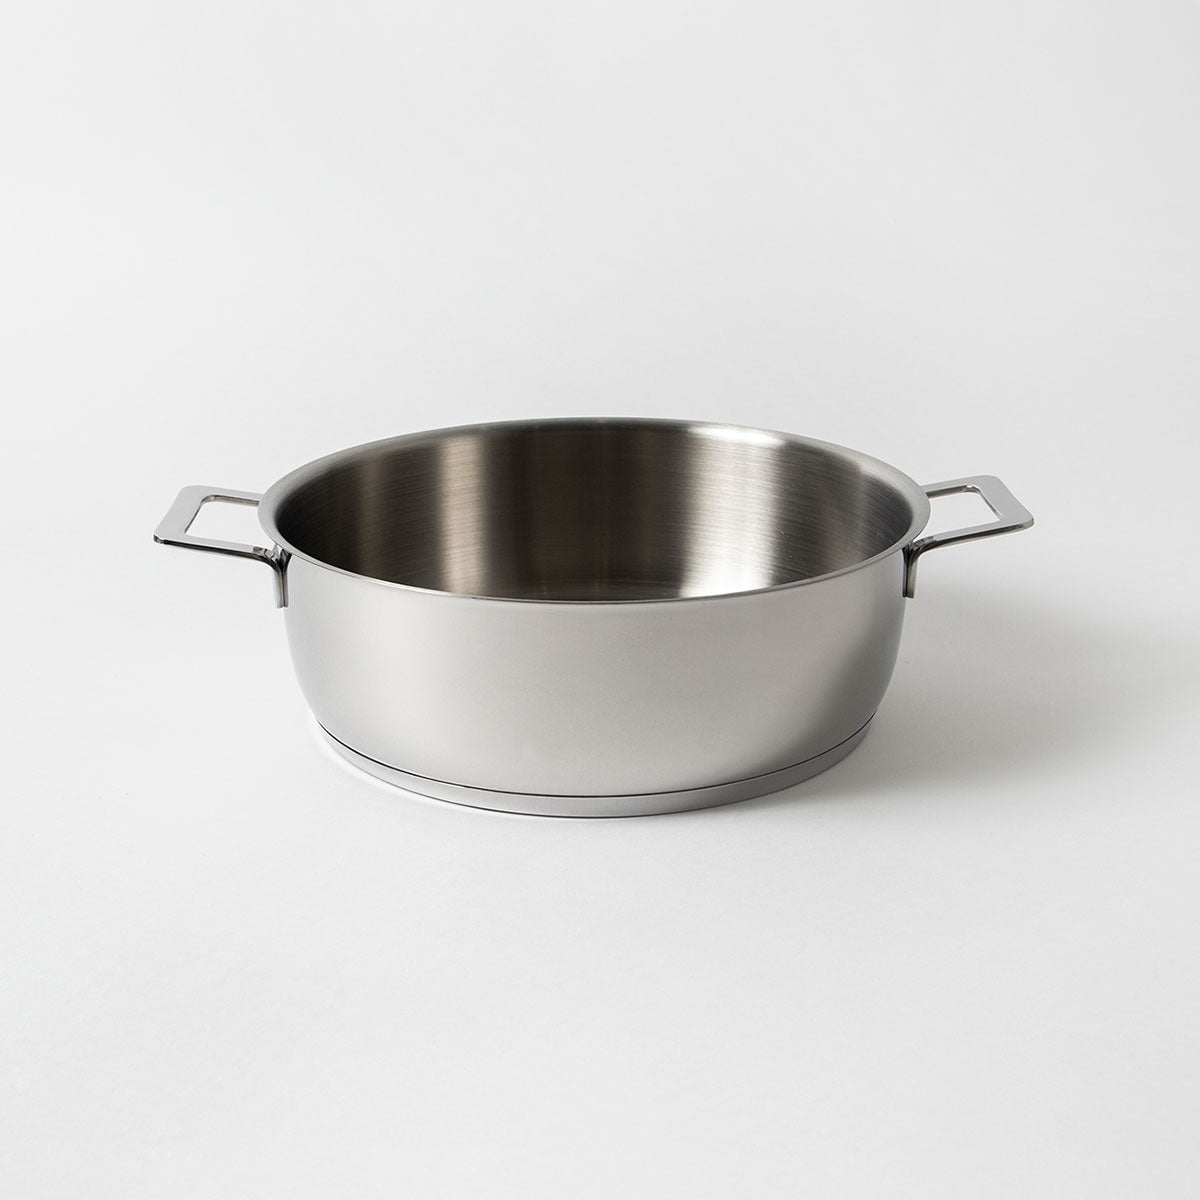 ALESSI(アレッシィ) Pots&Pans キャセロール with two handles 16cm 